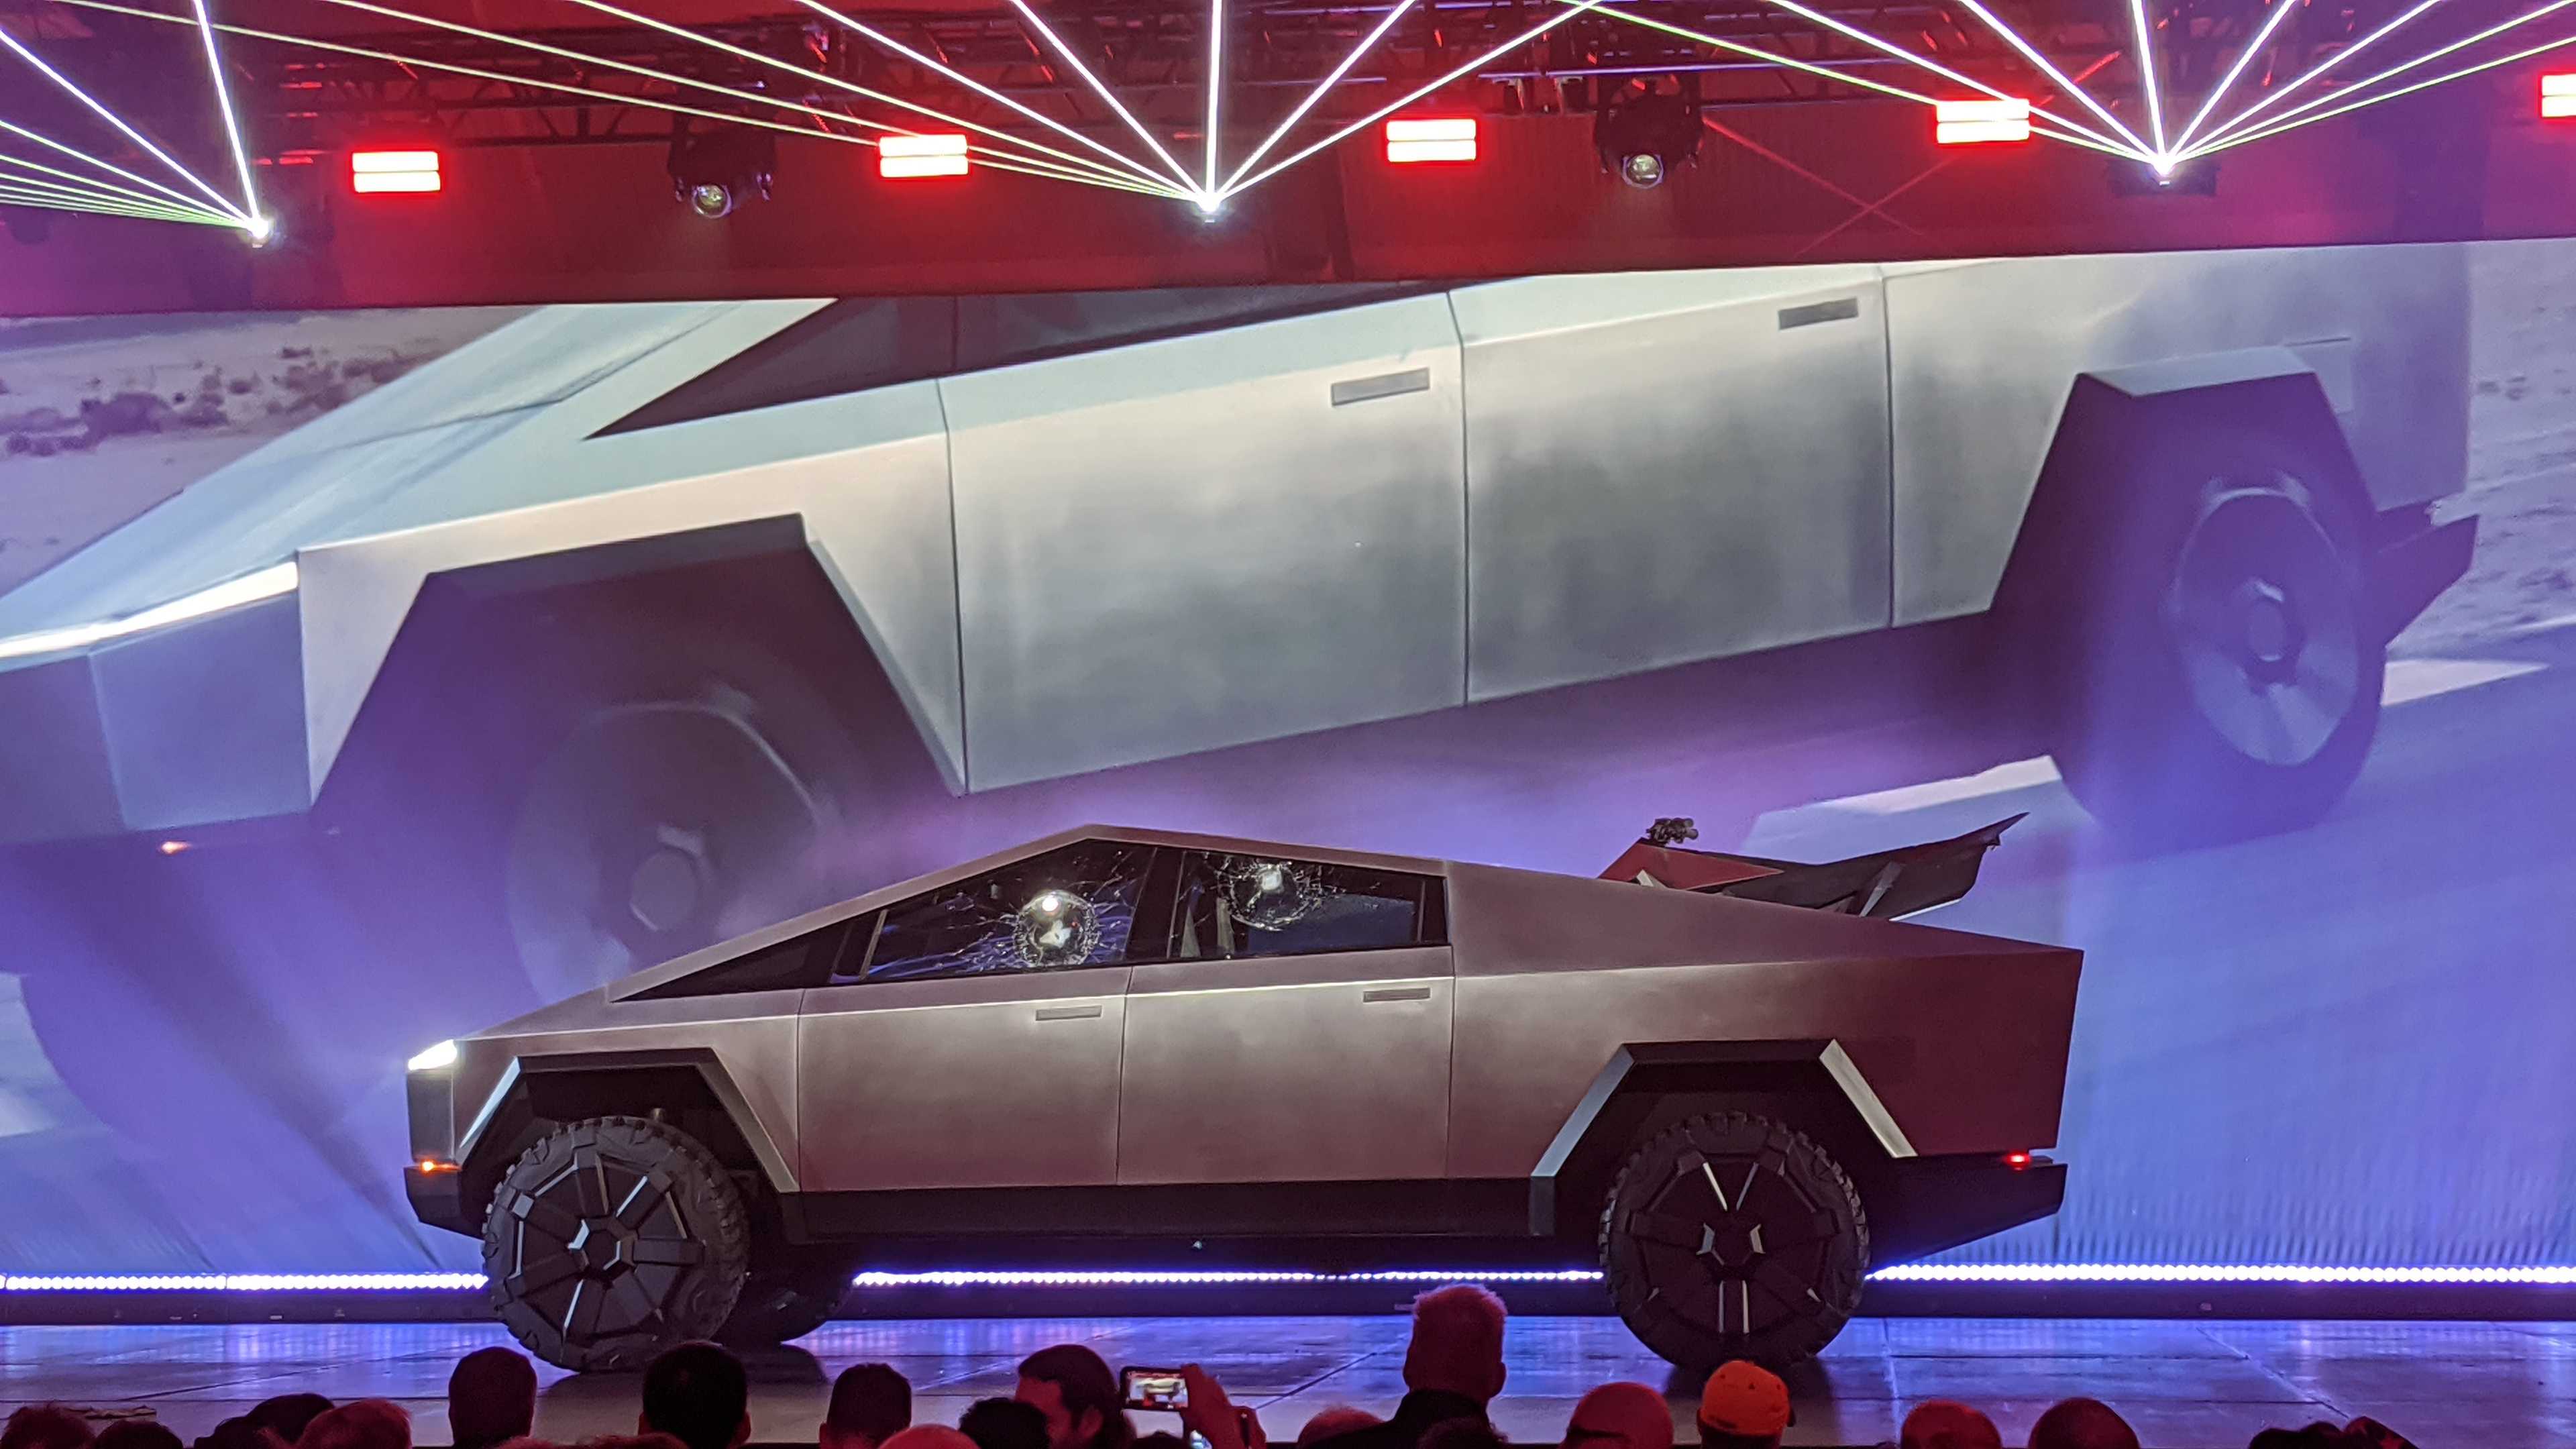 We have five questions about Tesla's Cybertruck